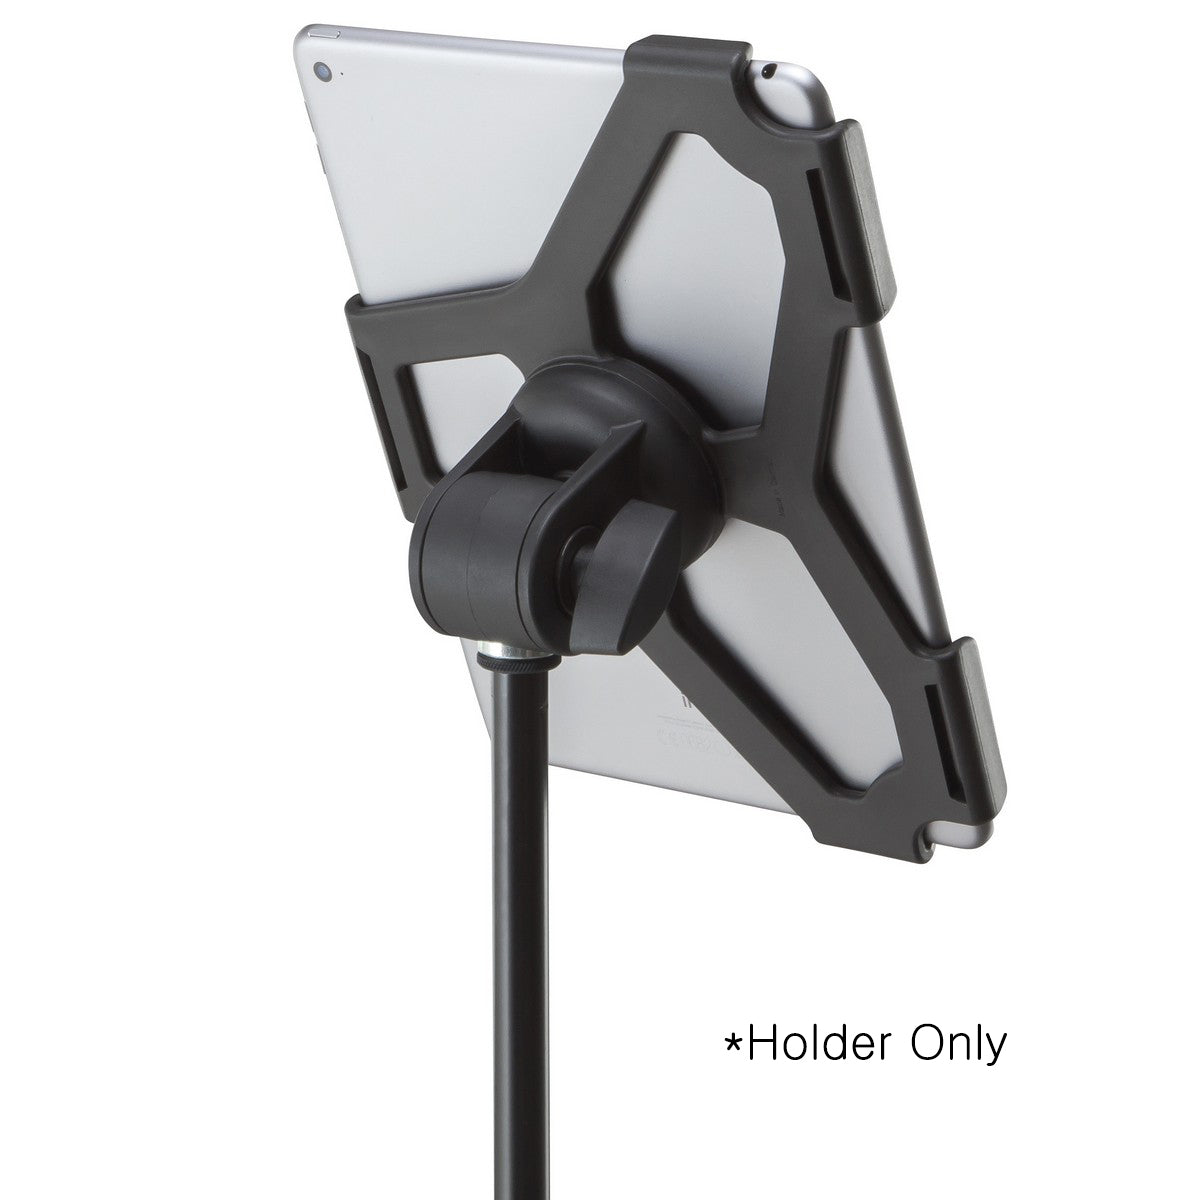 K&M iPad Air 2 5/8-Inch Microphone Stand Holder, Black (Used)